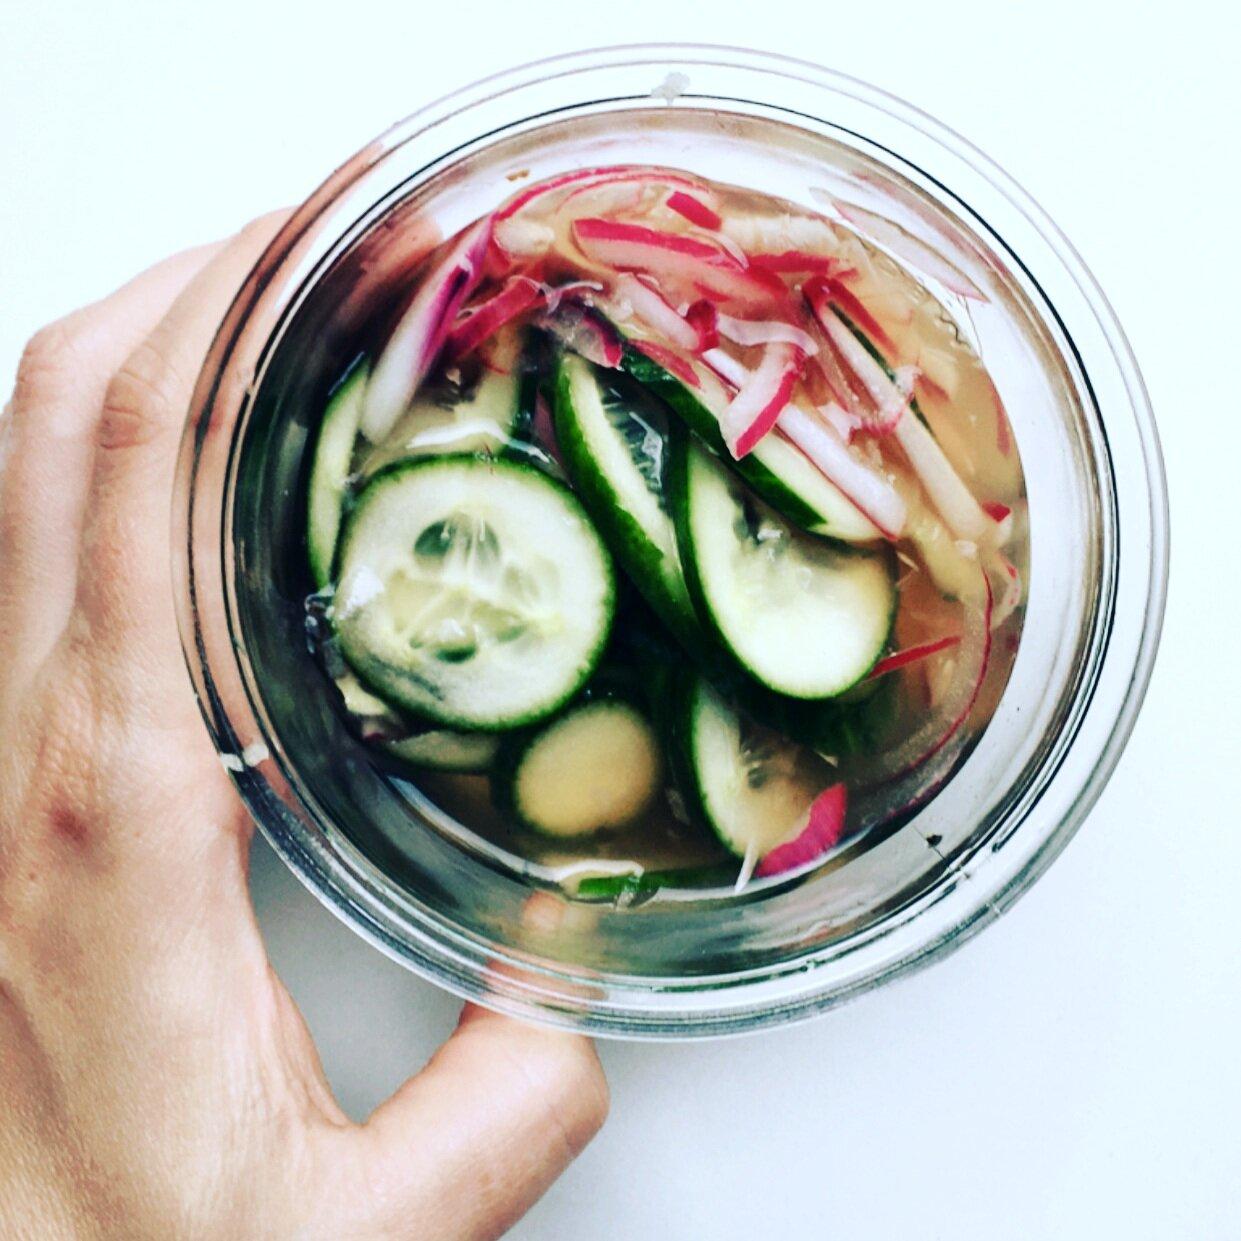 Quickled Cucumbers (that's quick pickled cucumbers)